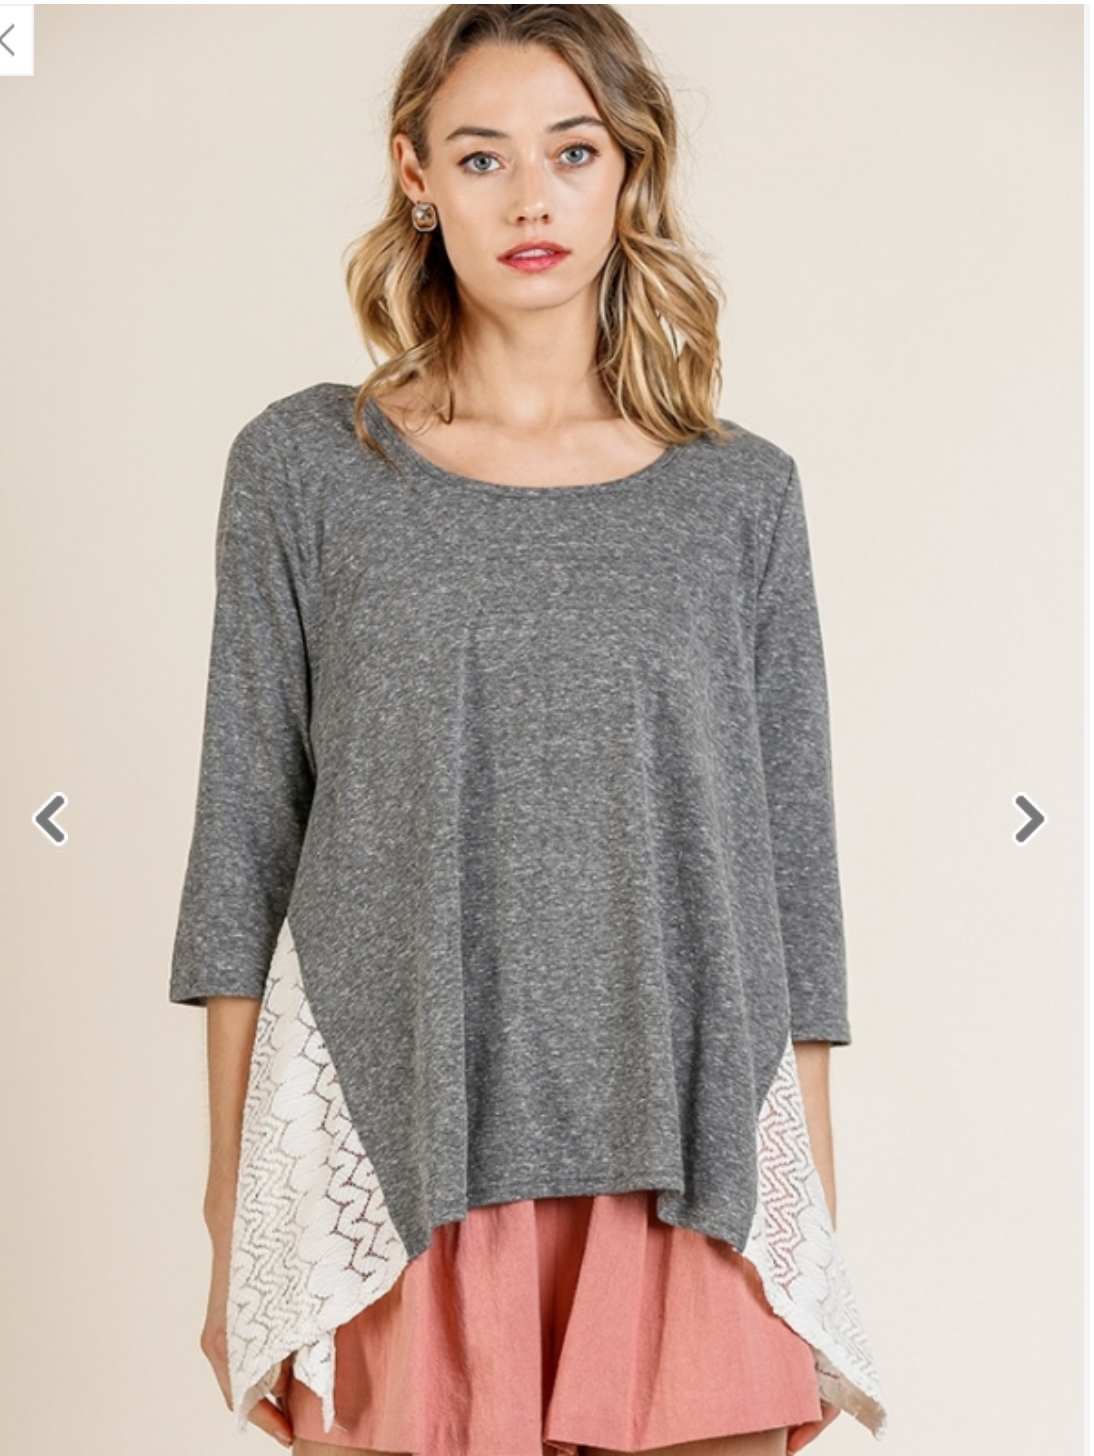 grey 3/4 shirt with lace trim